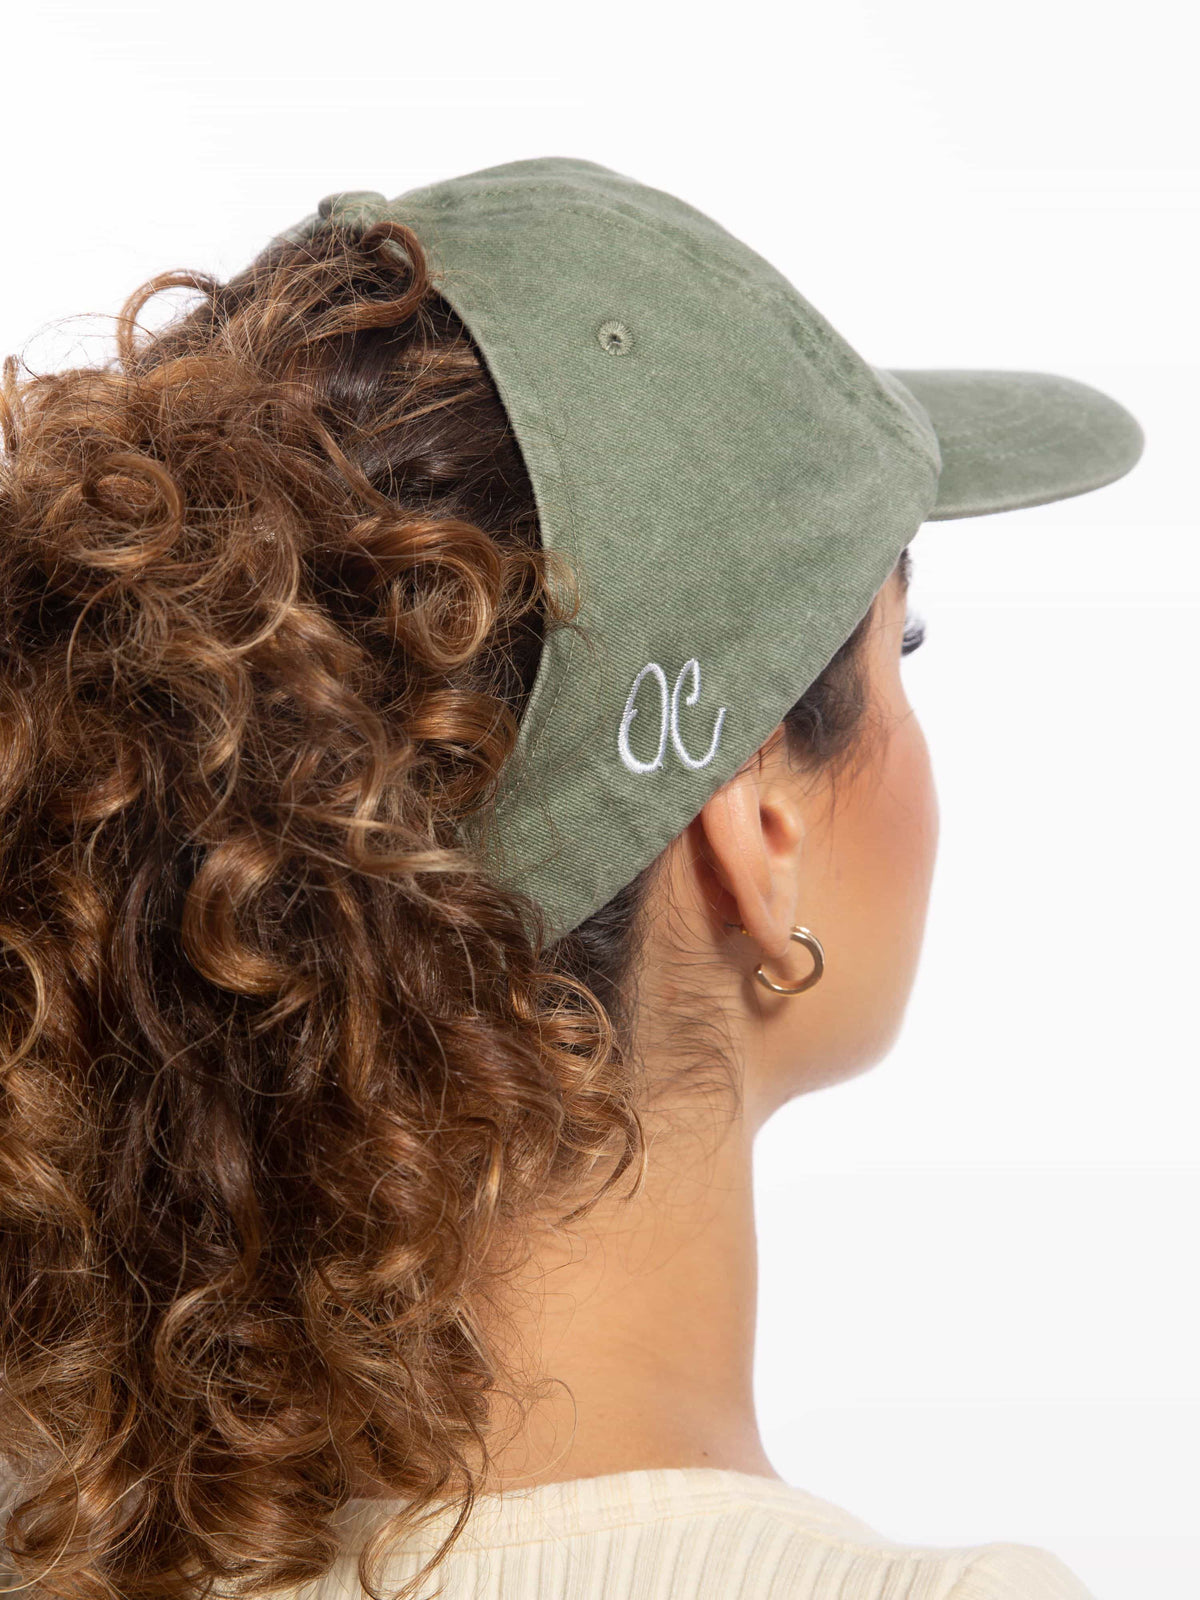 Only Curls Satin Lined Baseball Hat (with open back) - Washed Olive - Only Curls